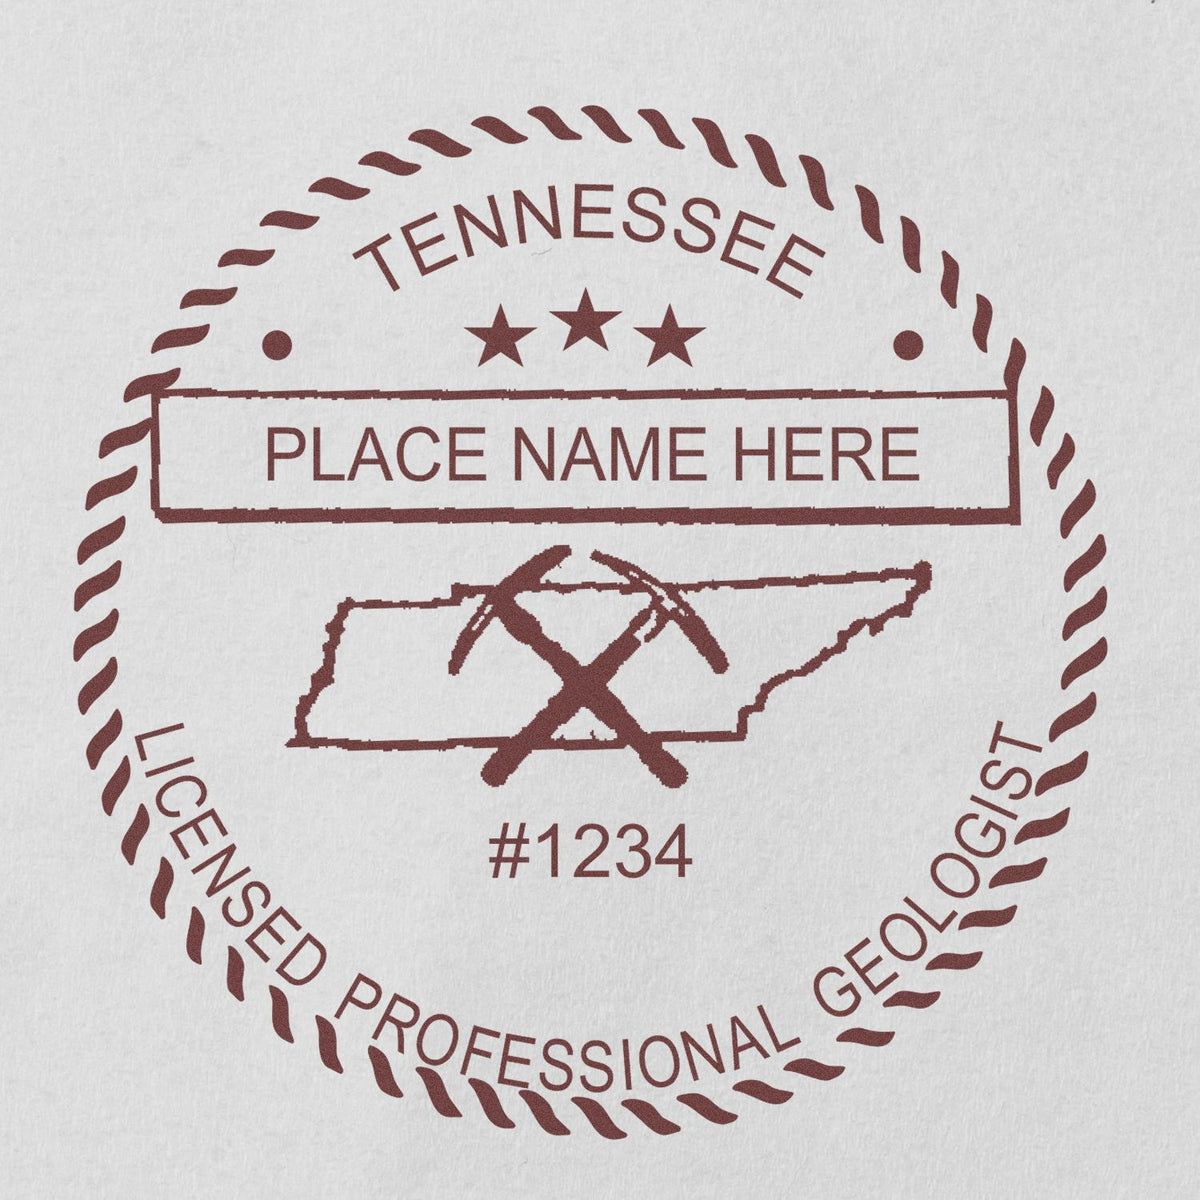 Another Example of a stamped impression of the Digital Tennessee Geologist Stamp, Electronic Seal for Tennessee Geologist on a office form